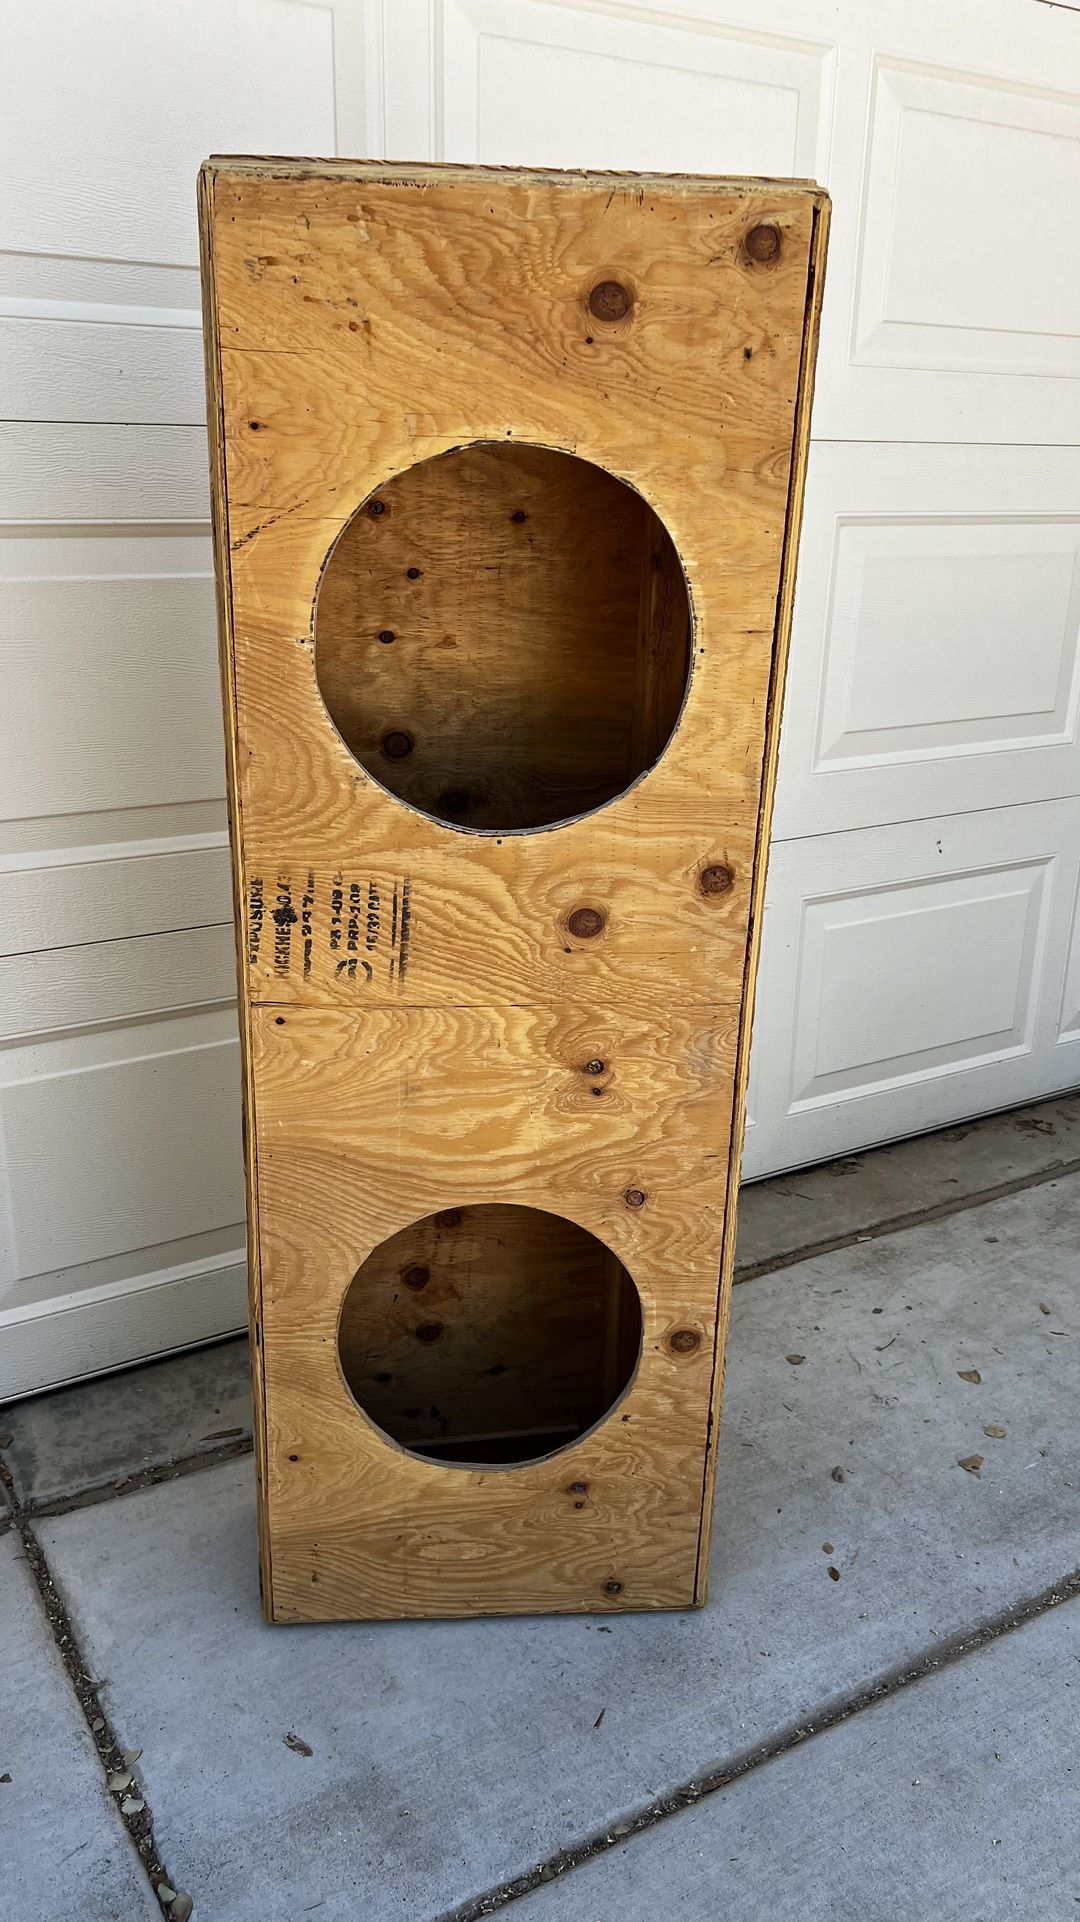 Subwoofer boxes for 12’s 